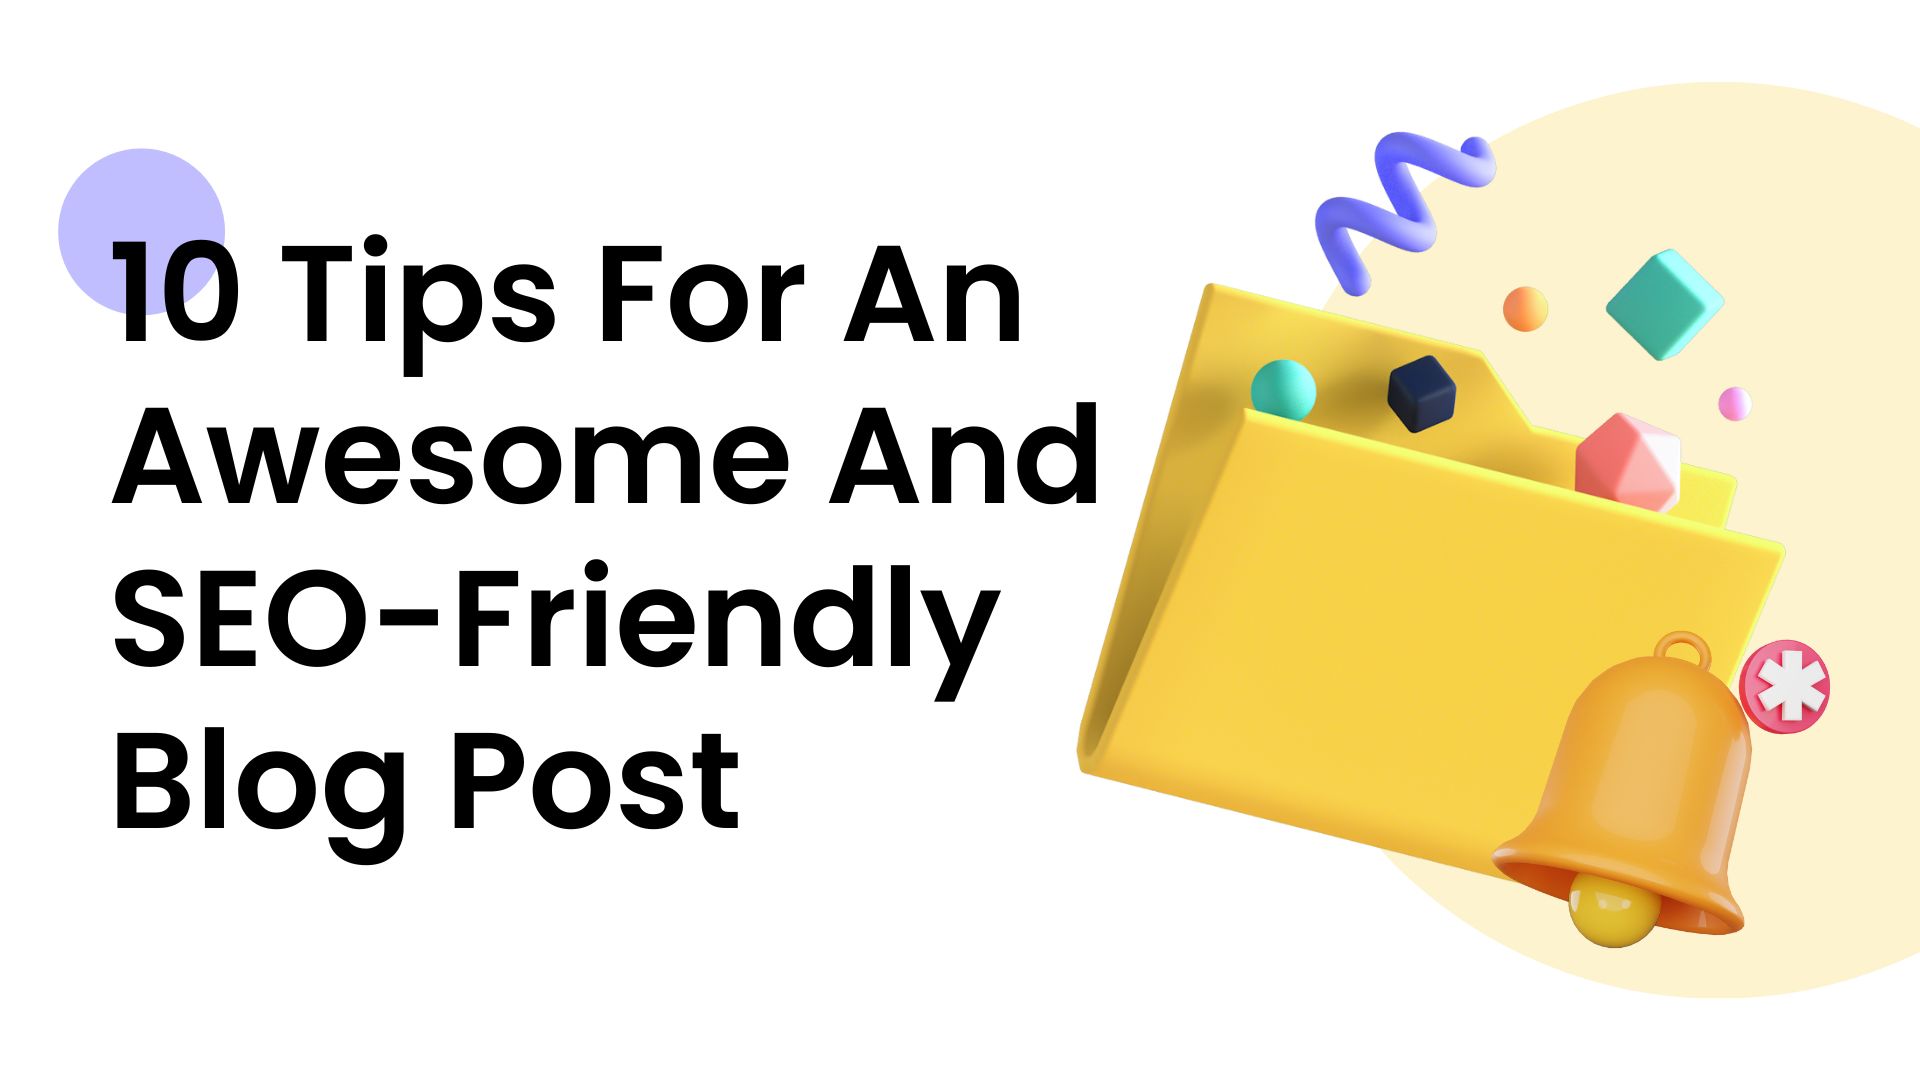 10 Tips For An Awesome And SEO-Friendly Blog Post